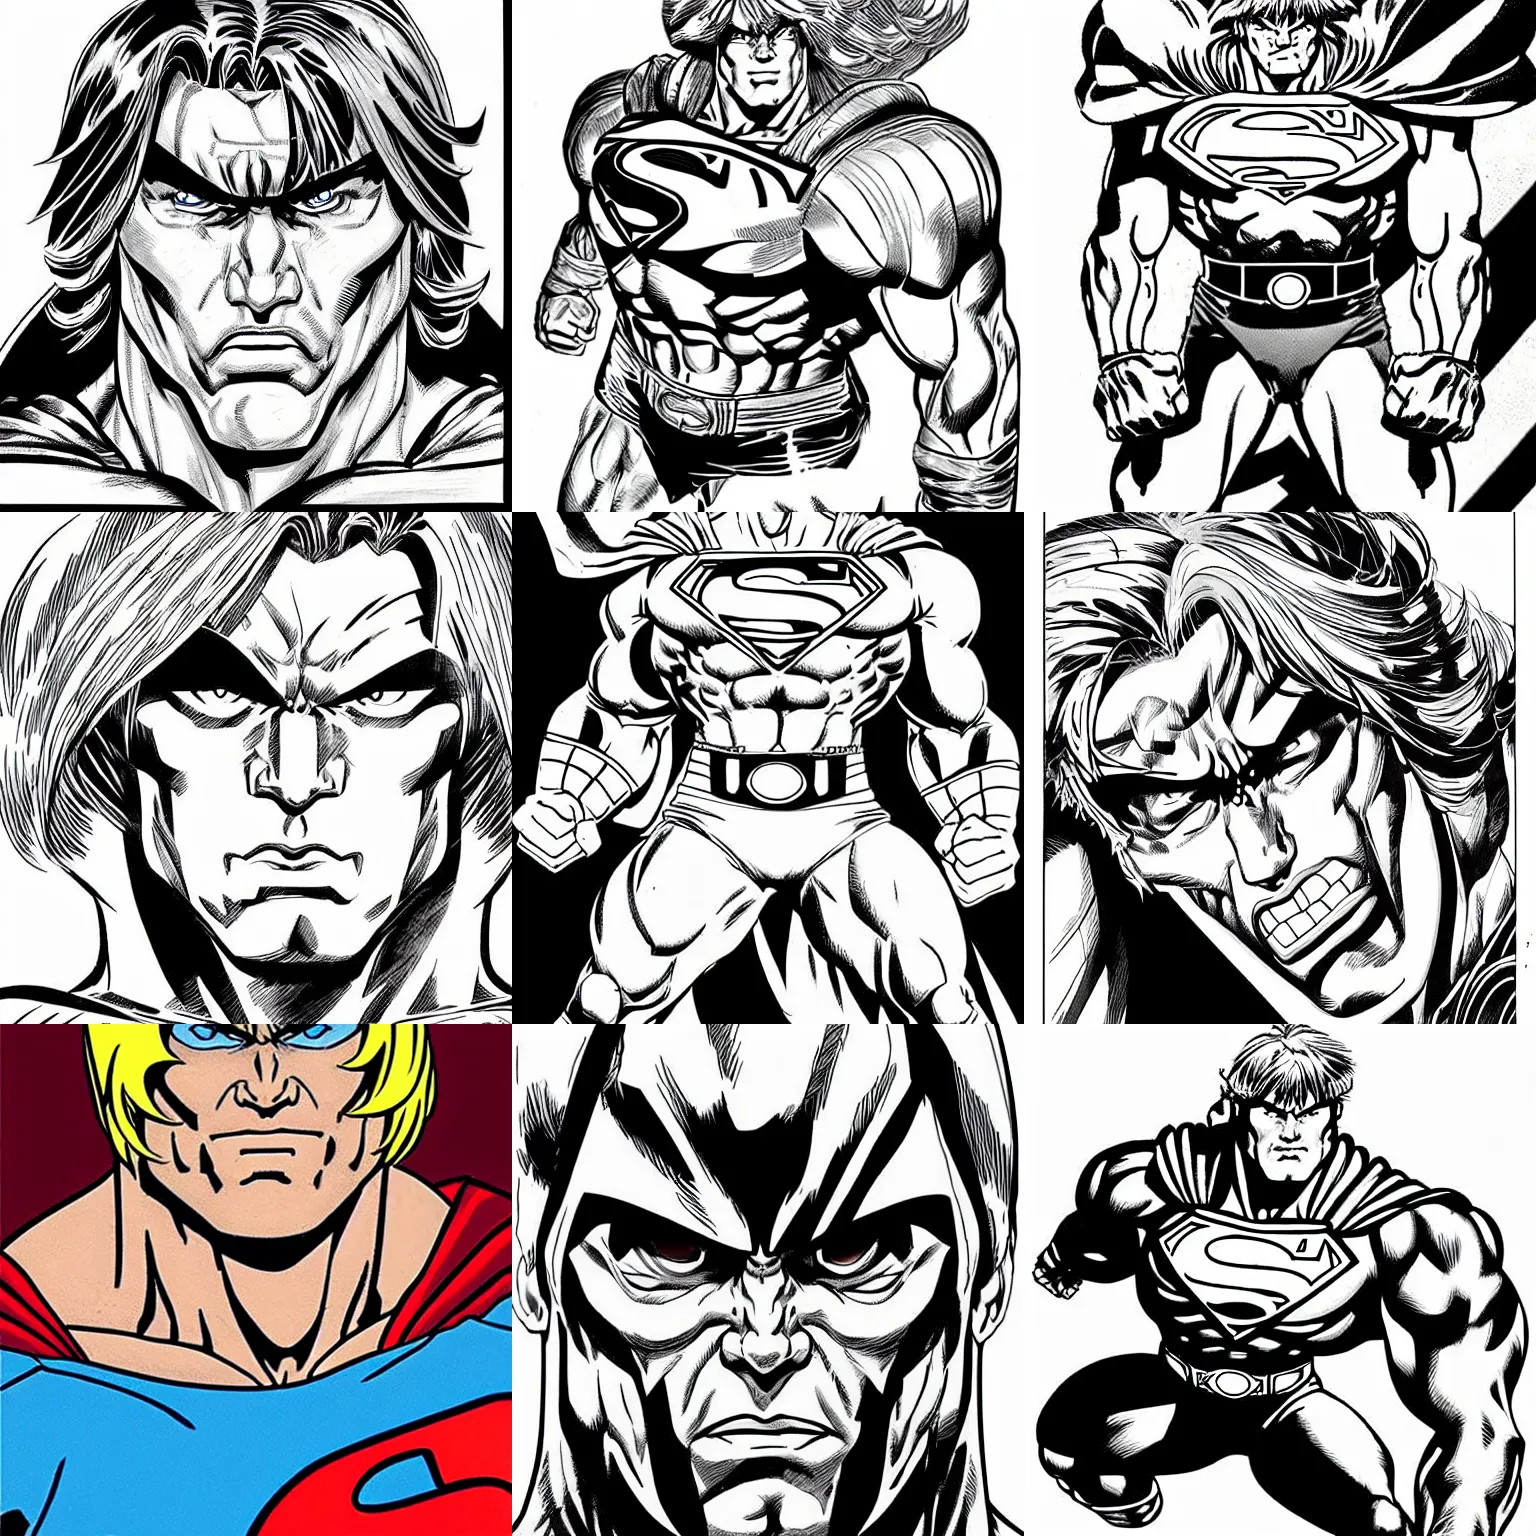 Prompt: he - man!!! jim lee!!! macro calm!! face shot!! flat ink sketch by jim lee face close up headshot superman costume in the style of jim lee, x - men superhero comic book character by jim lee